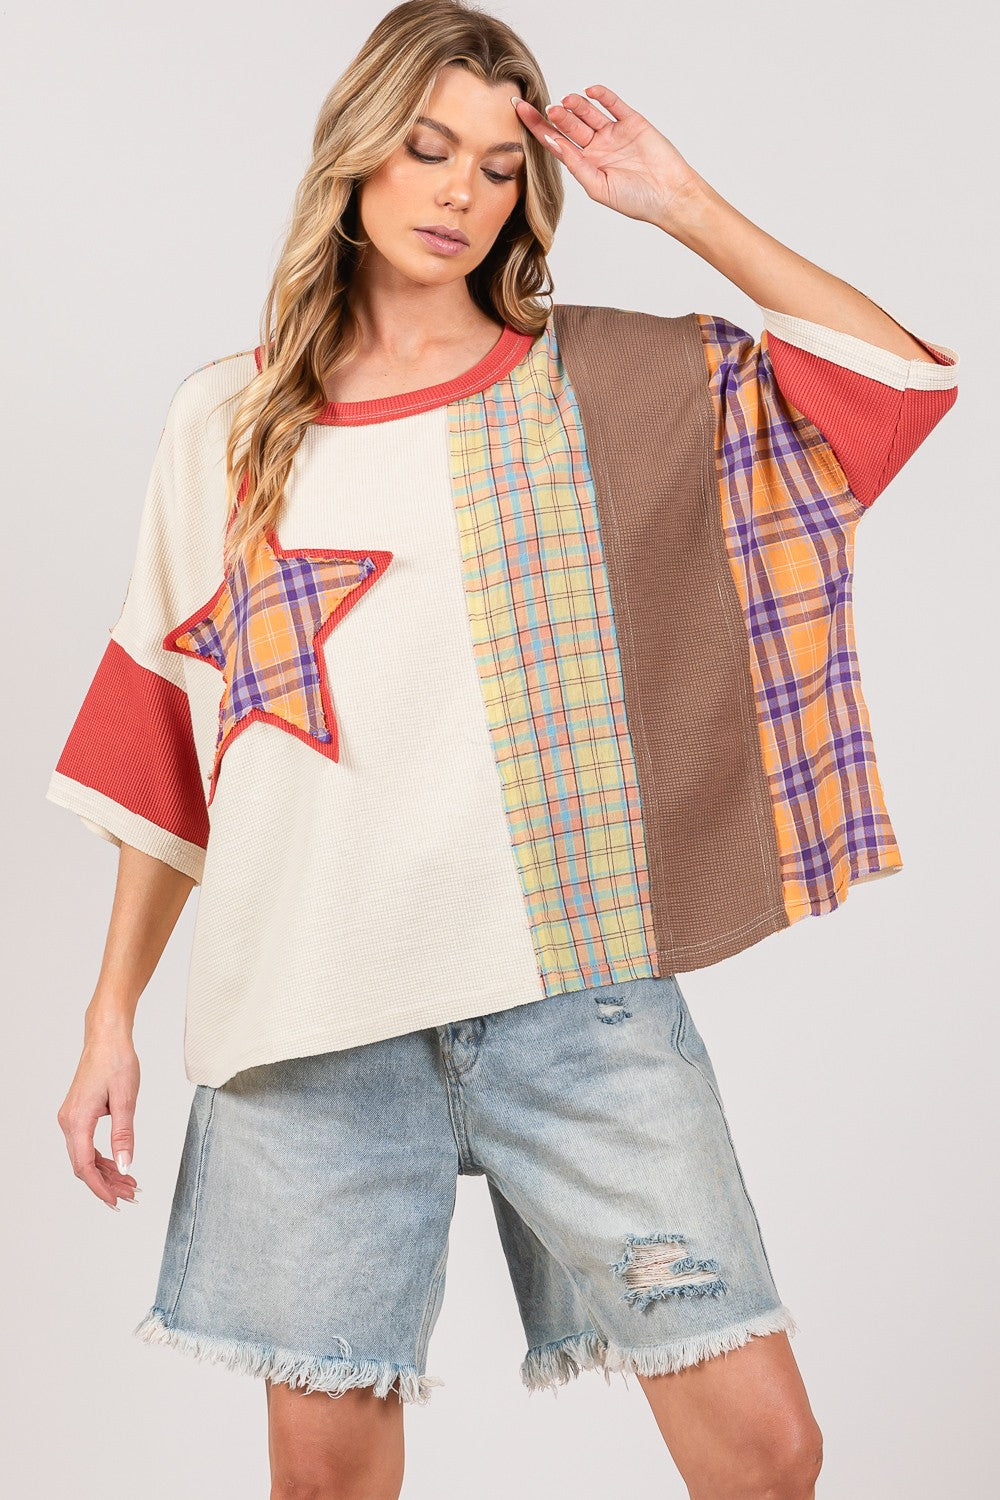 SAGE + FIG Round Neck Plaid Star Patch T-Shirt in Berry Trendsi